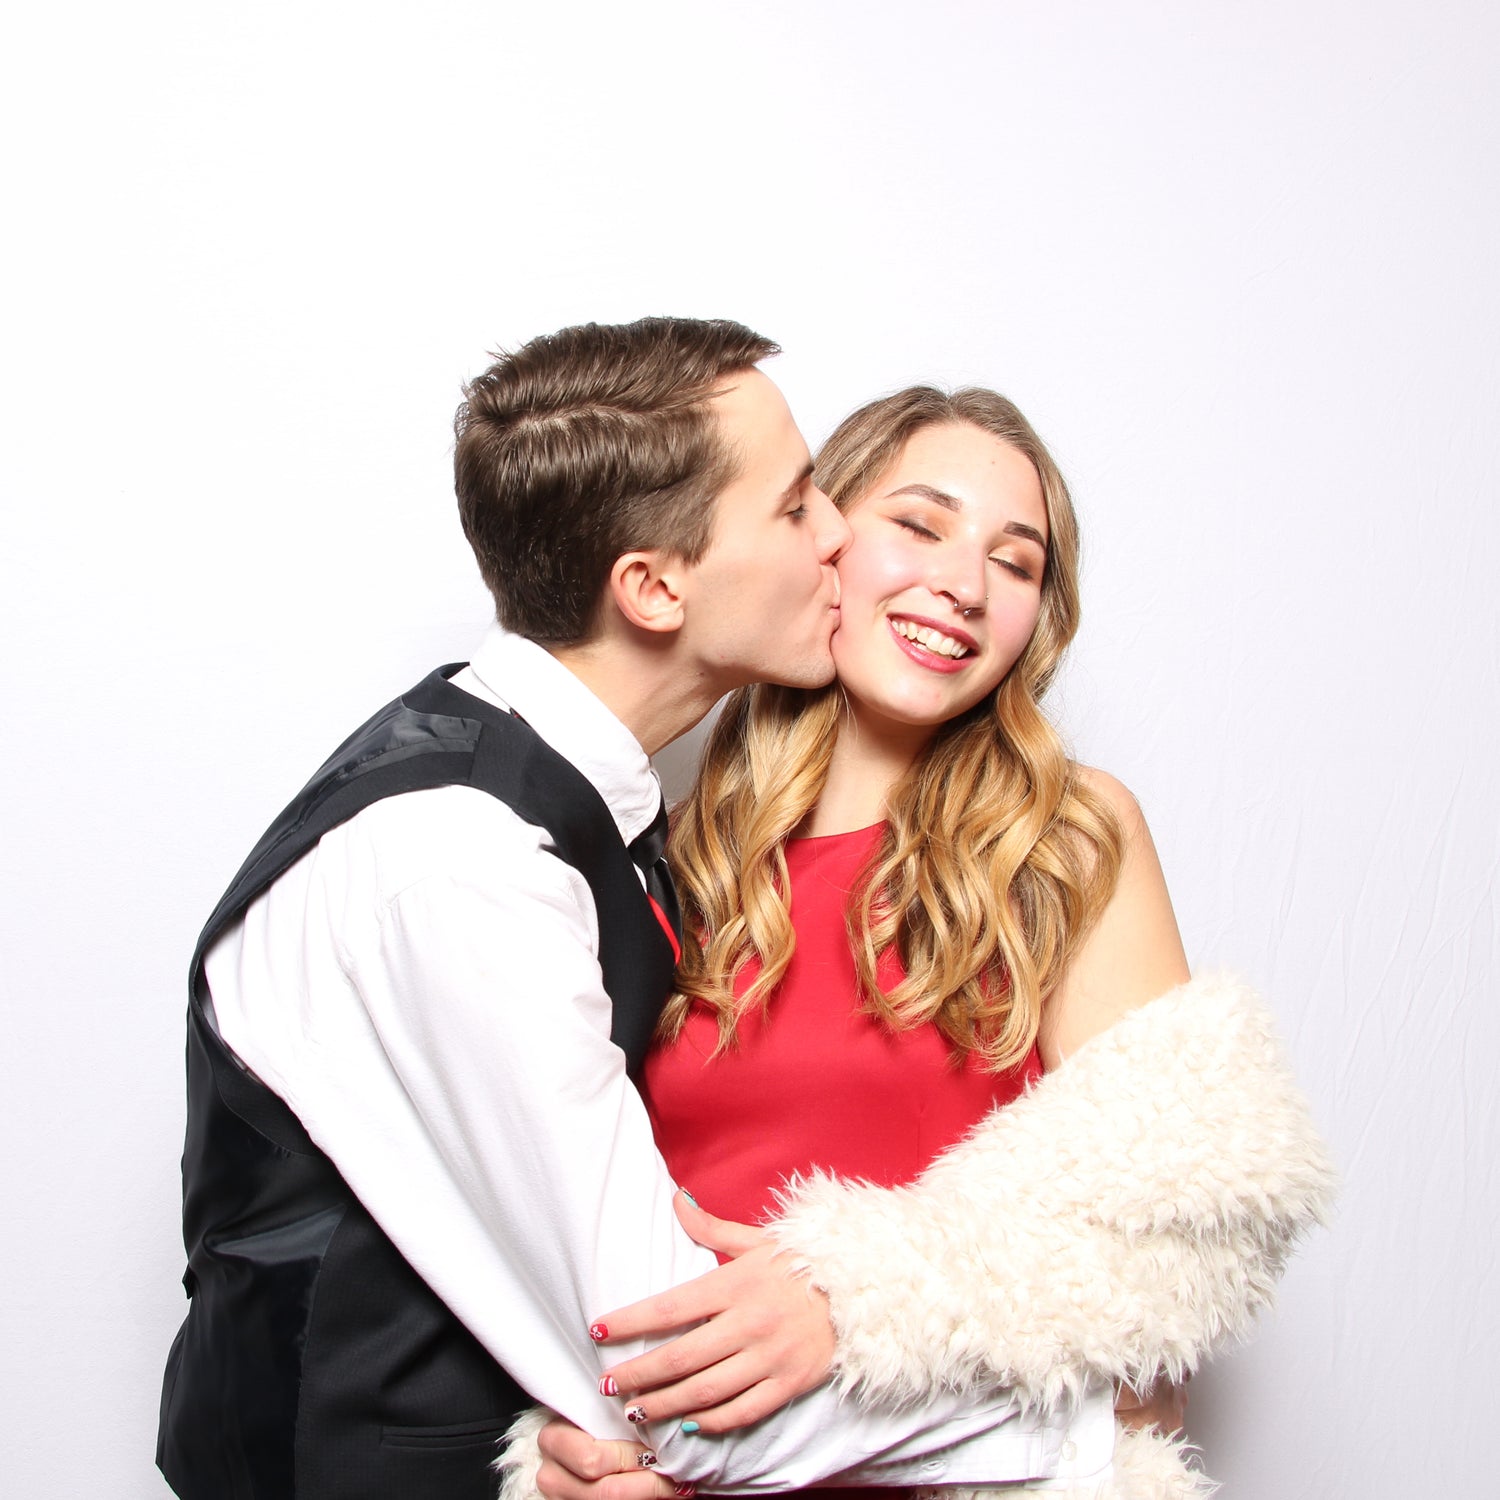 Man in a tuxedo kissing a woman in a red dress in a photo booth